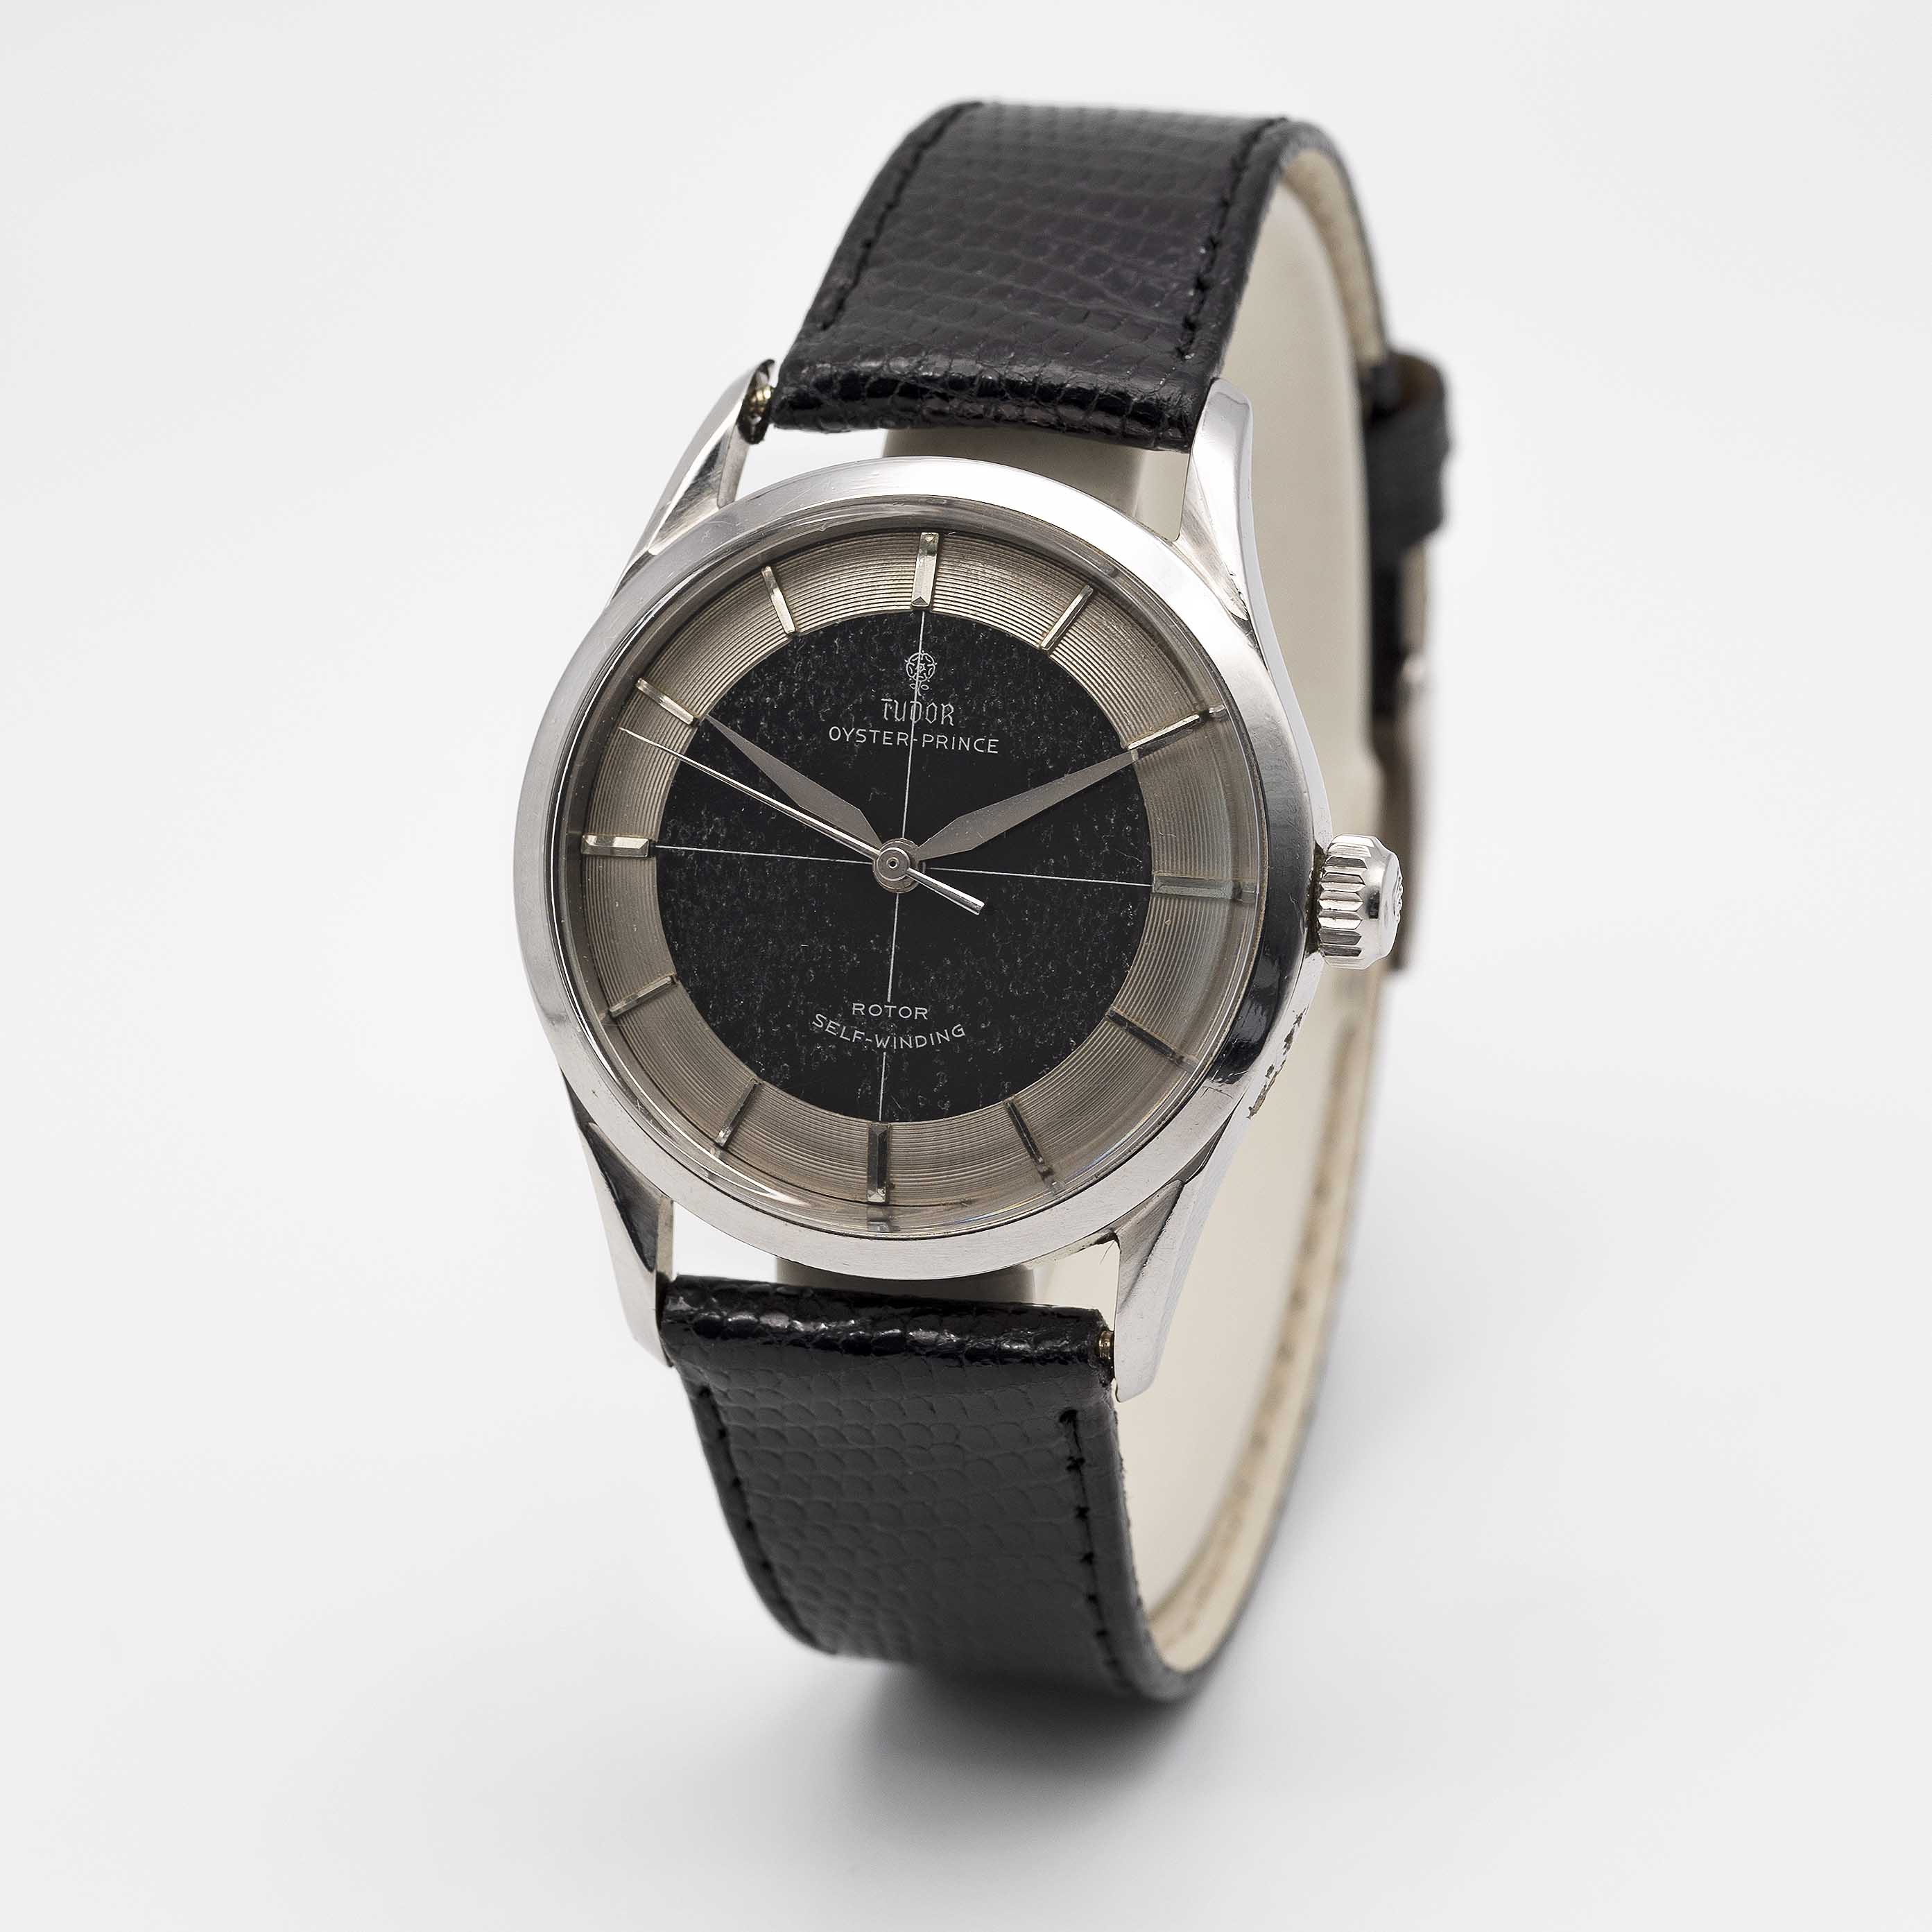 A GENTLEMAN'S STAINLESS STEEL ROLEX TUDOR OYSTER PRINCE "TUXEDO" WRIST WATCH CIRCA 1957, REF. 7967 - Image 4 of 9